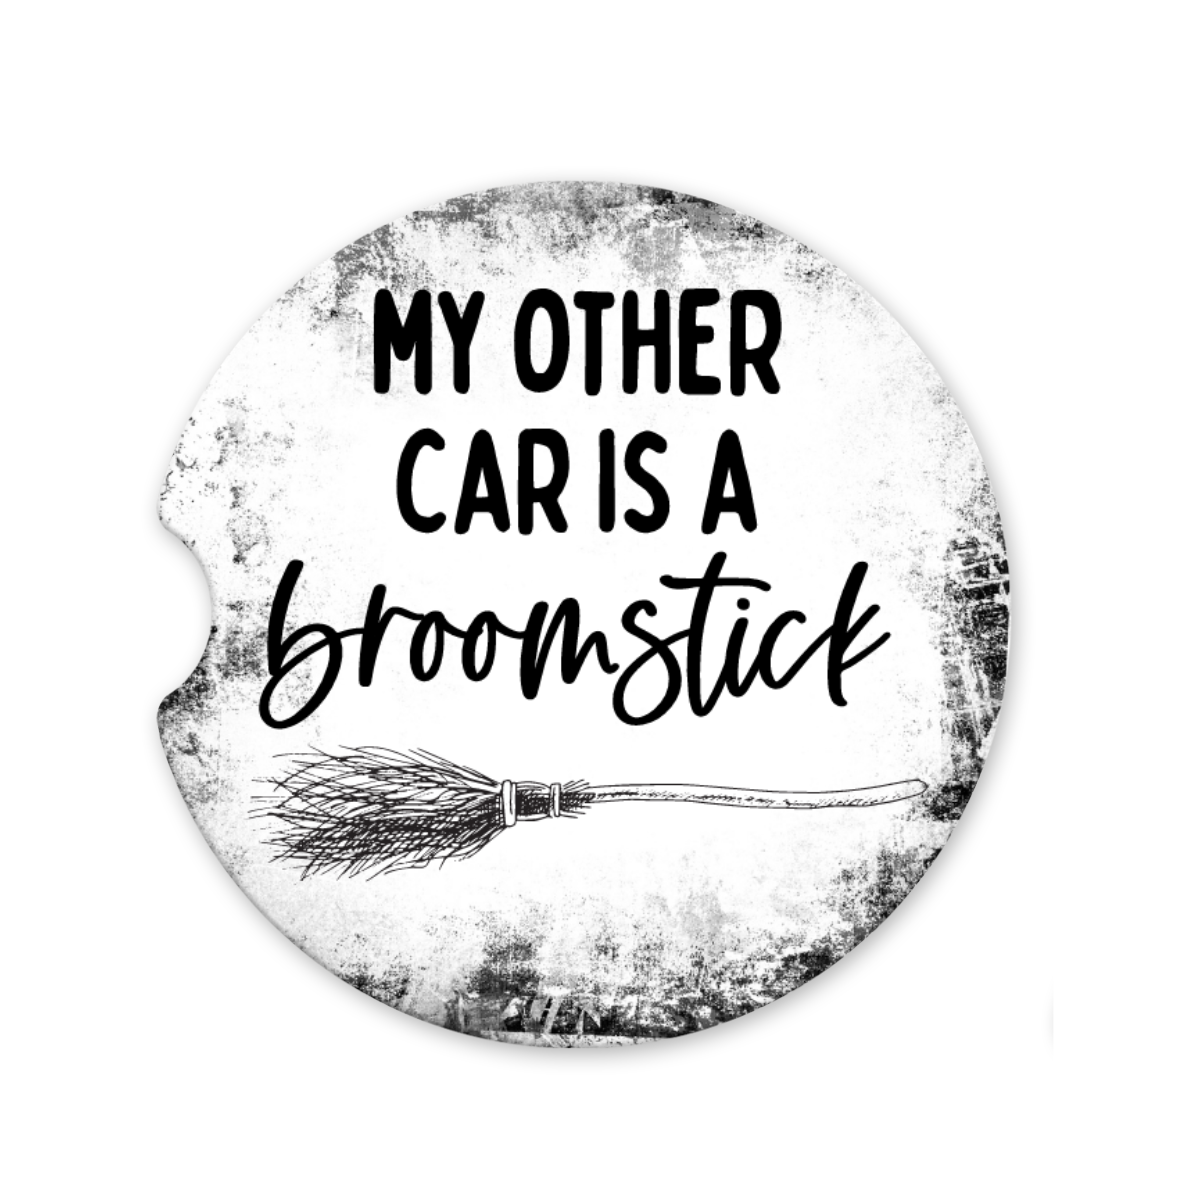 My Other Car Is A Broomstick | Car Coaster - The Pretty Things.ca